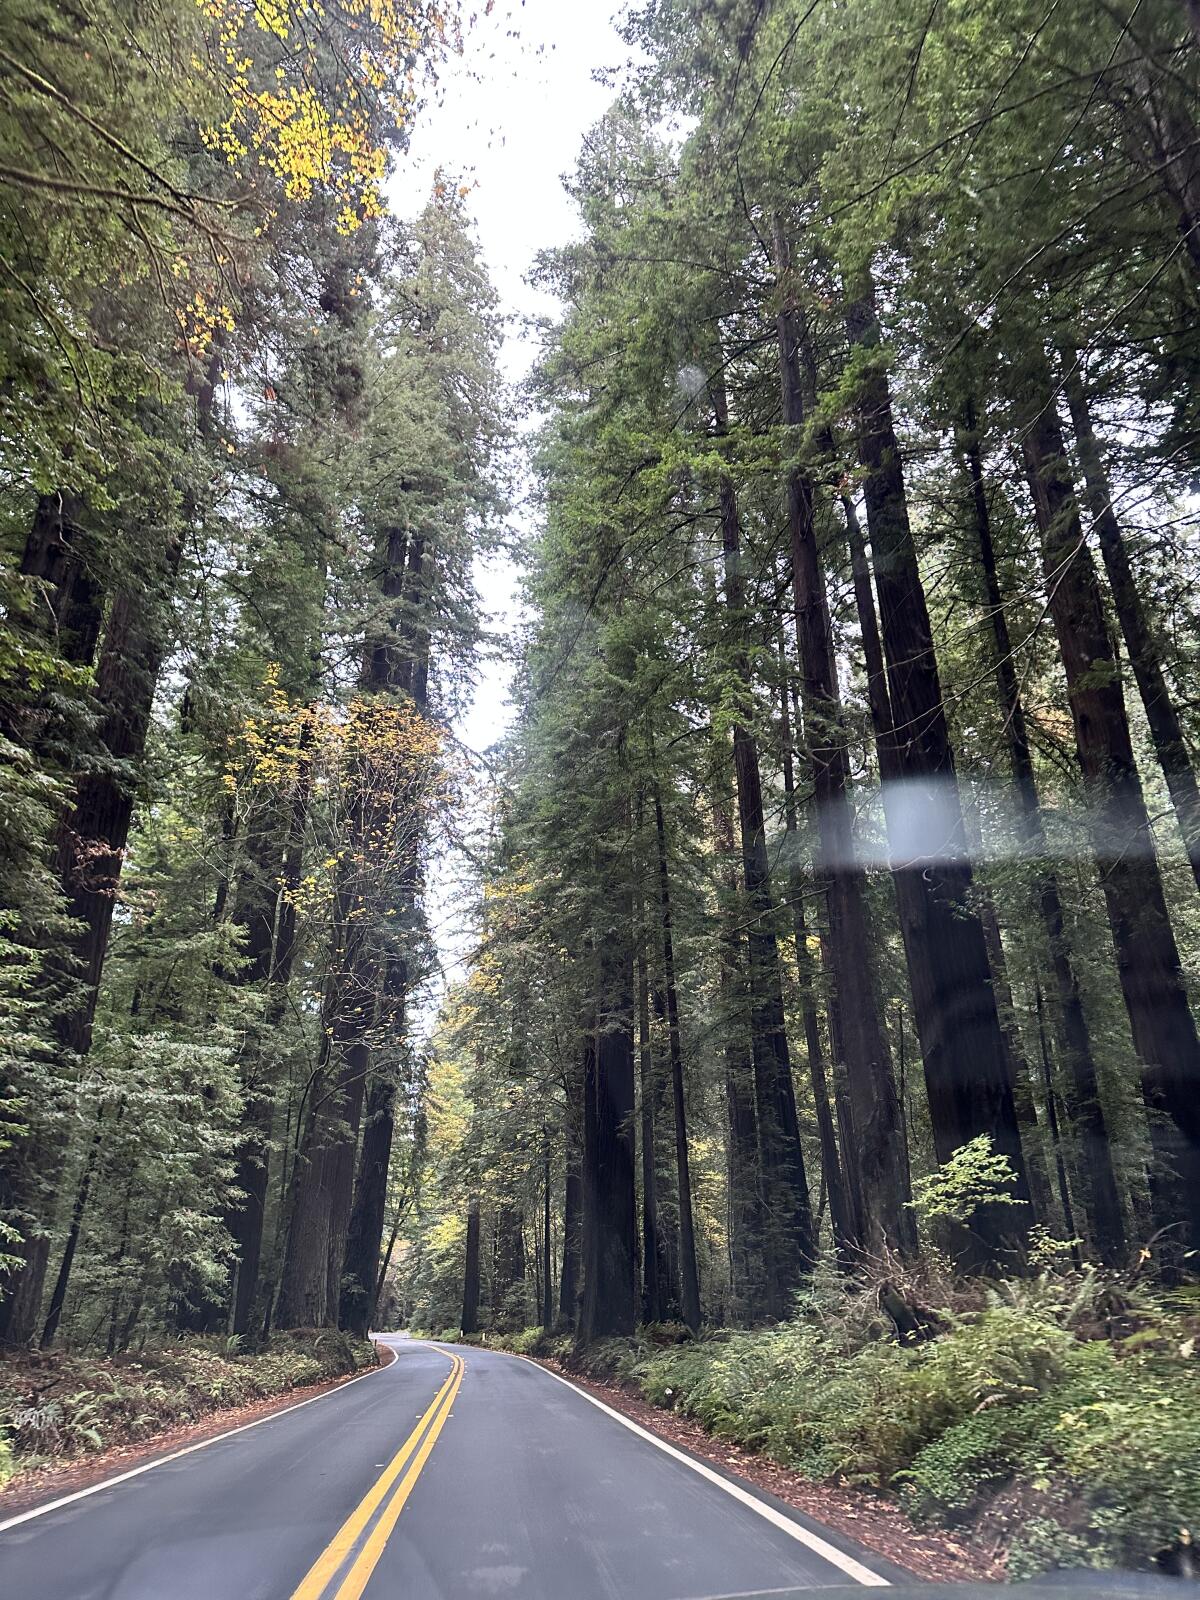 The scenic Avenue of the Giants route in Humboldt County.